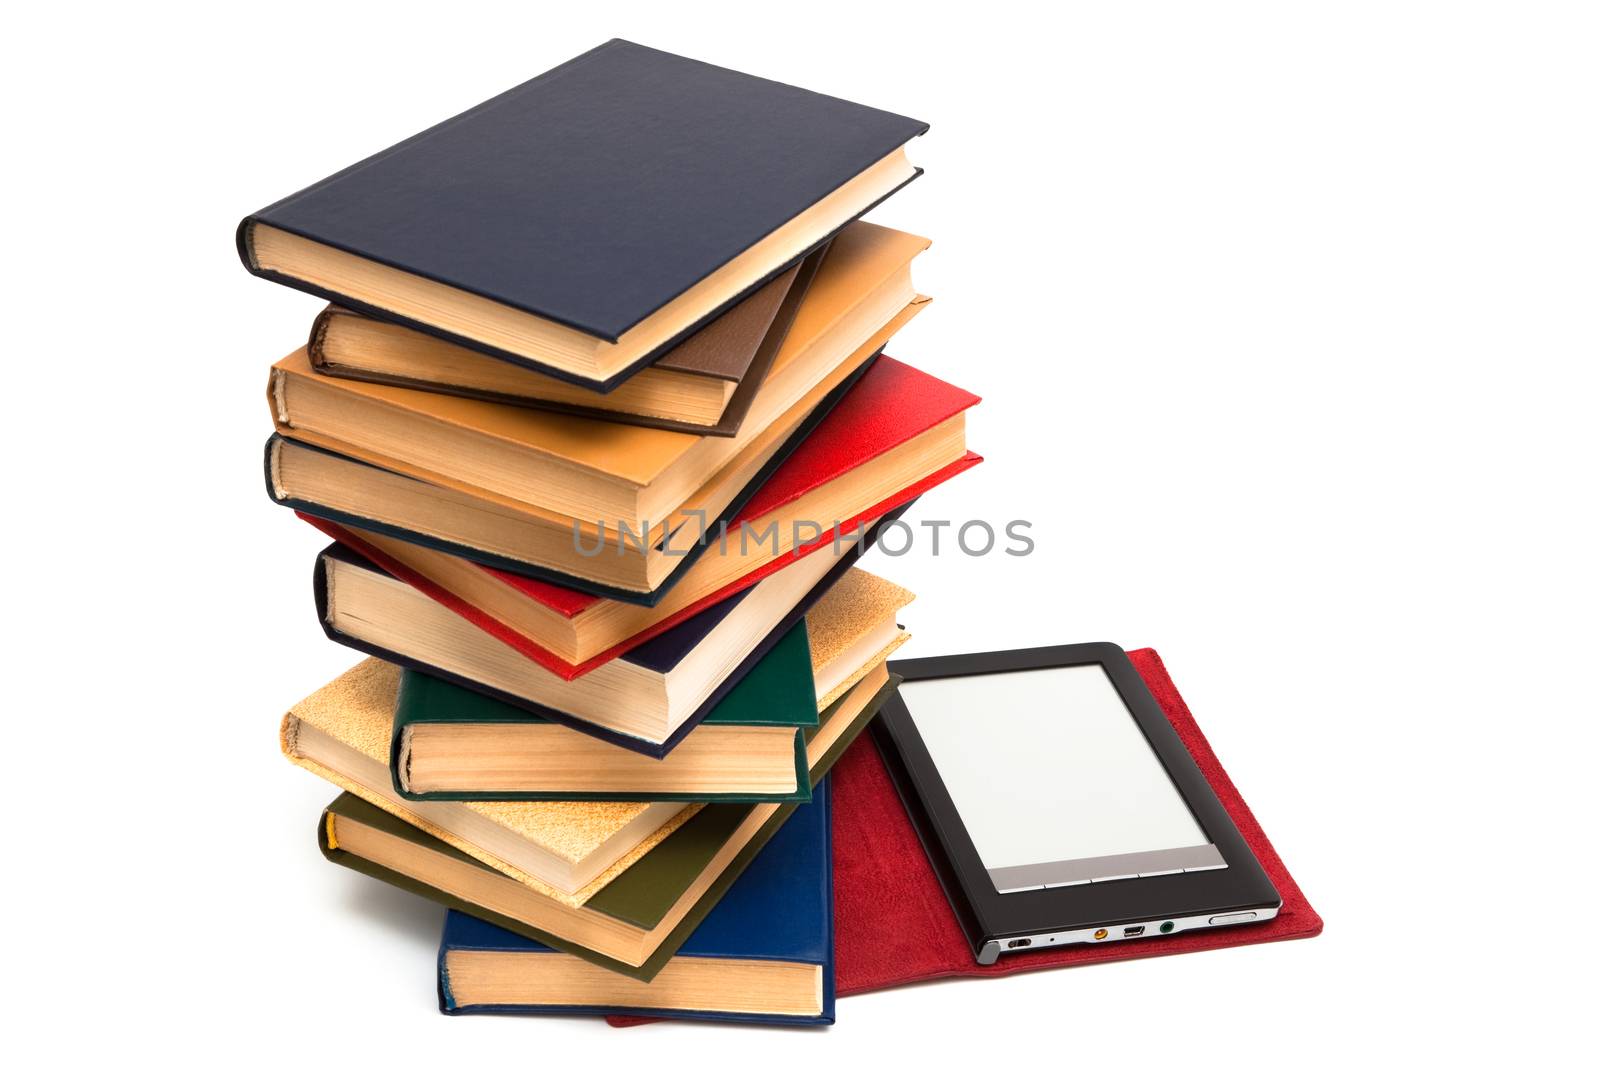 e-book and old books by terex